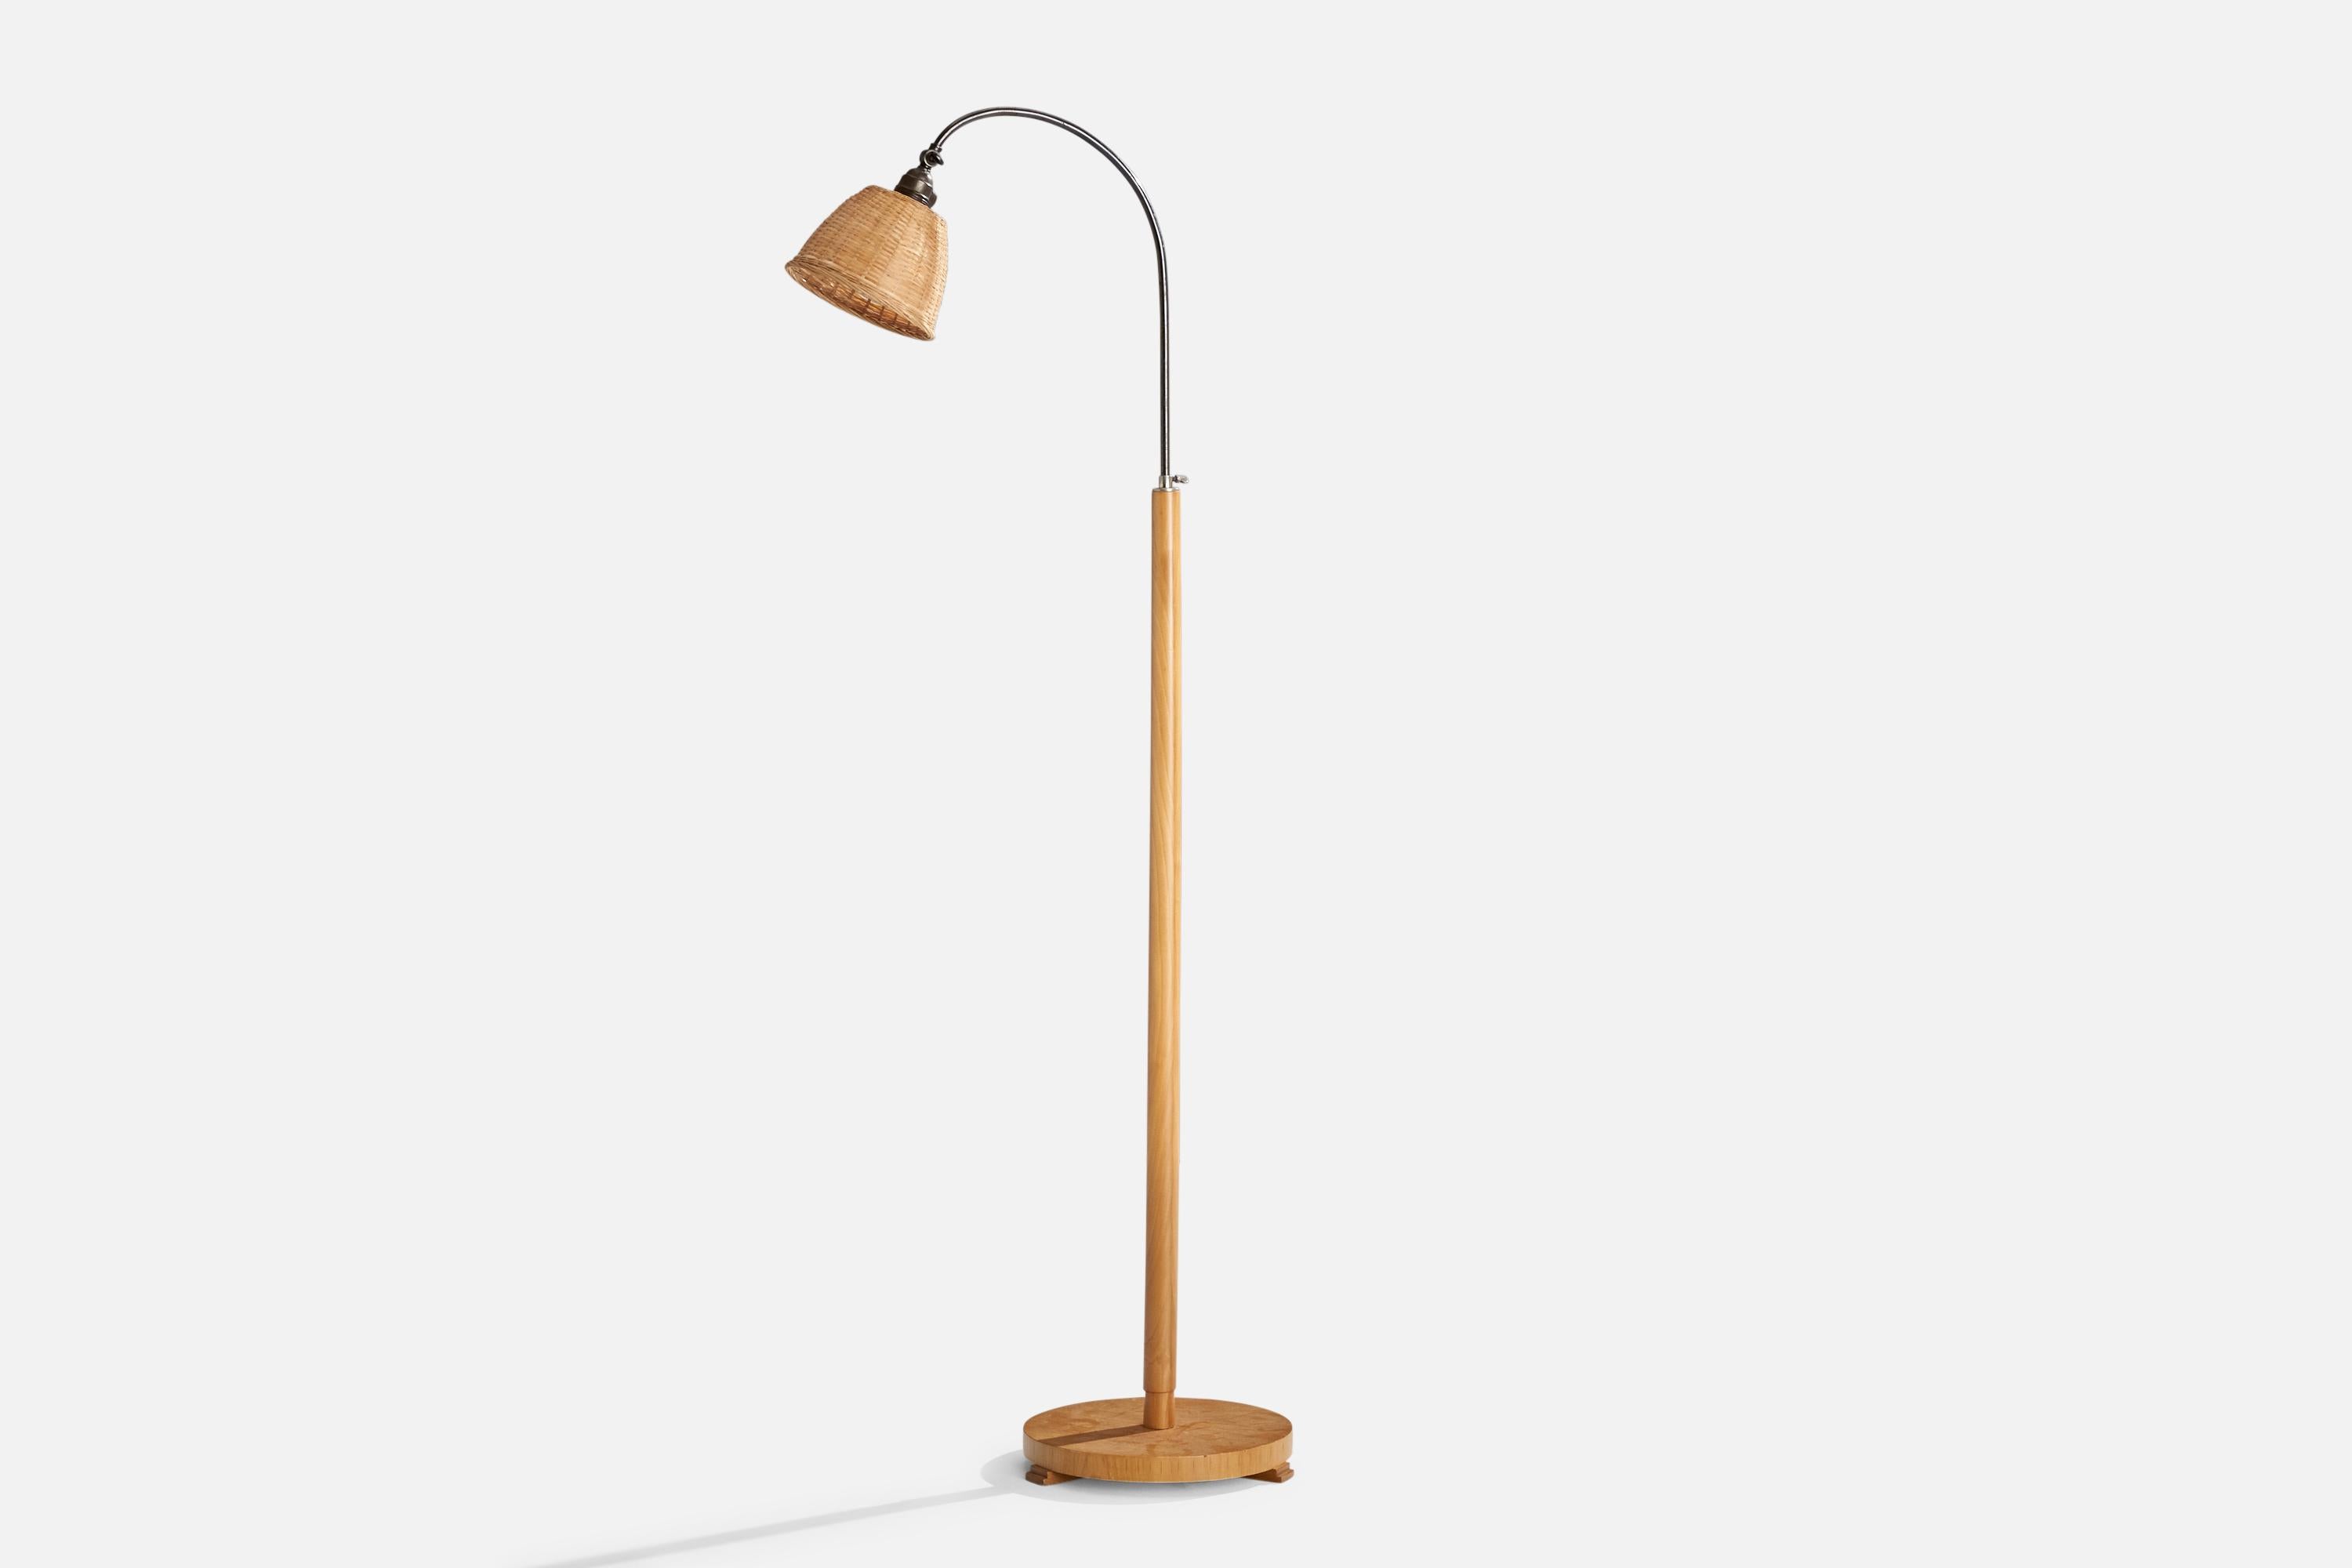 An adjustable birch, metal and rattan floor lamp designed and produced in Sweden, c. 1940s.

Dimensions variable 
Overall Dimensions (inches): 58.5” H x 6.5” W x 22” D
Stated dimensions include shade.
Bulb Specifications: E-26 Bulb
Number of